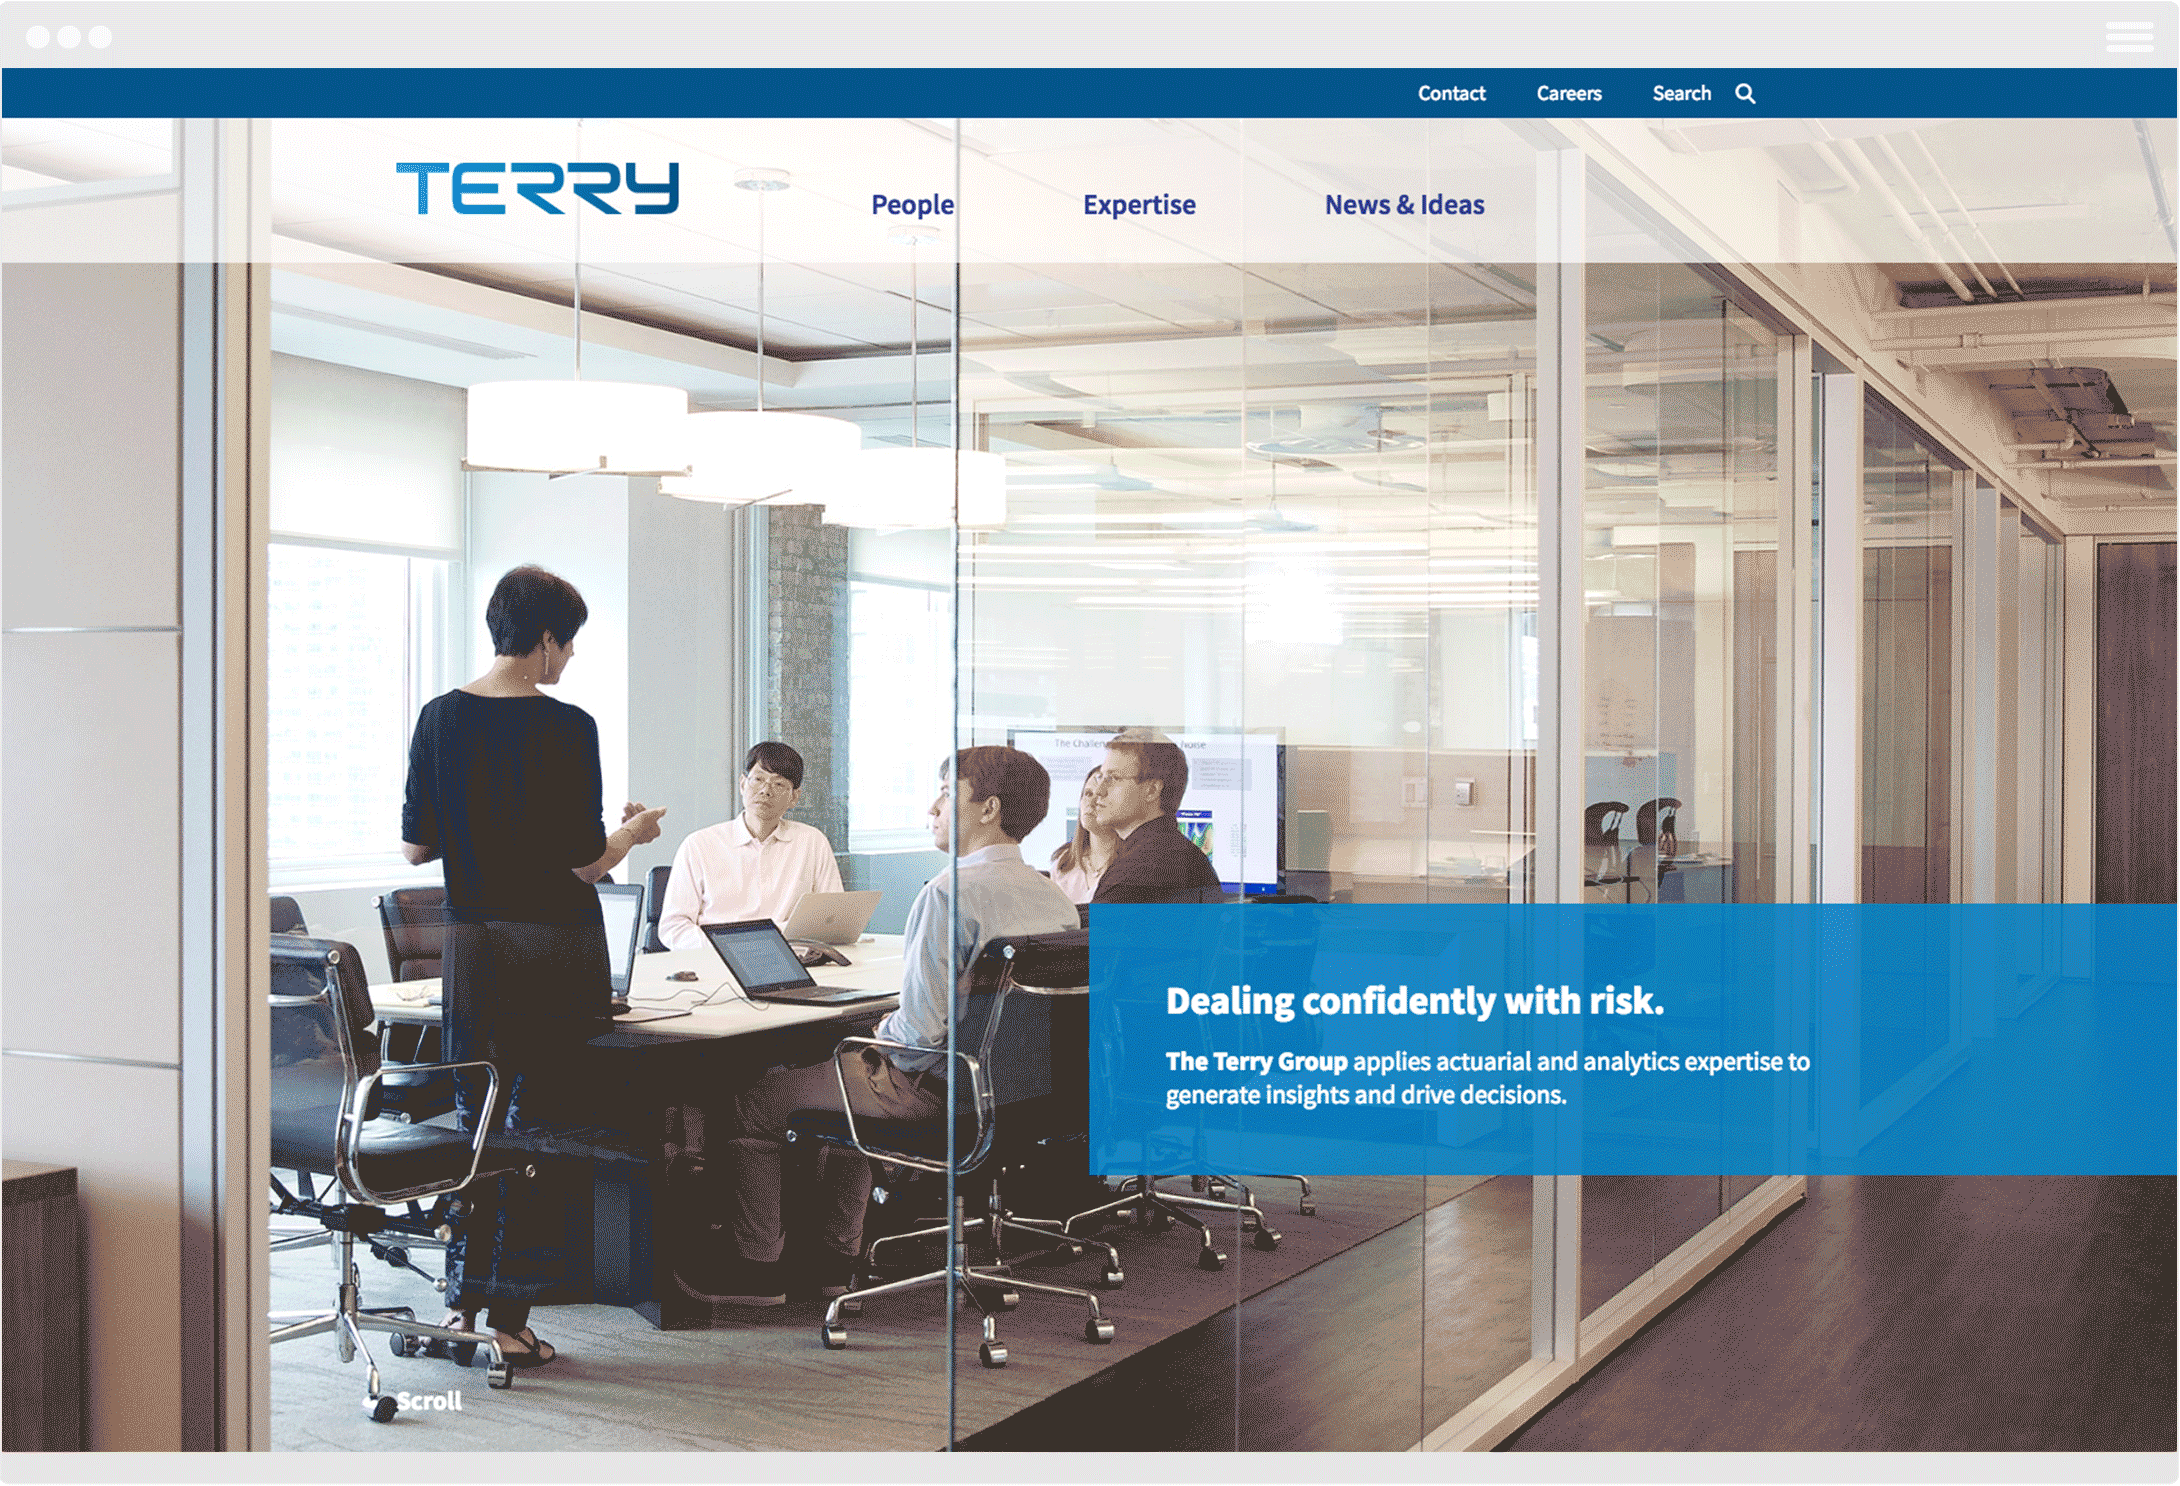 The Terry Group website and branding